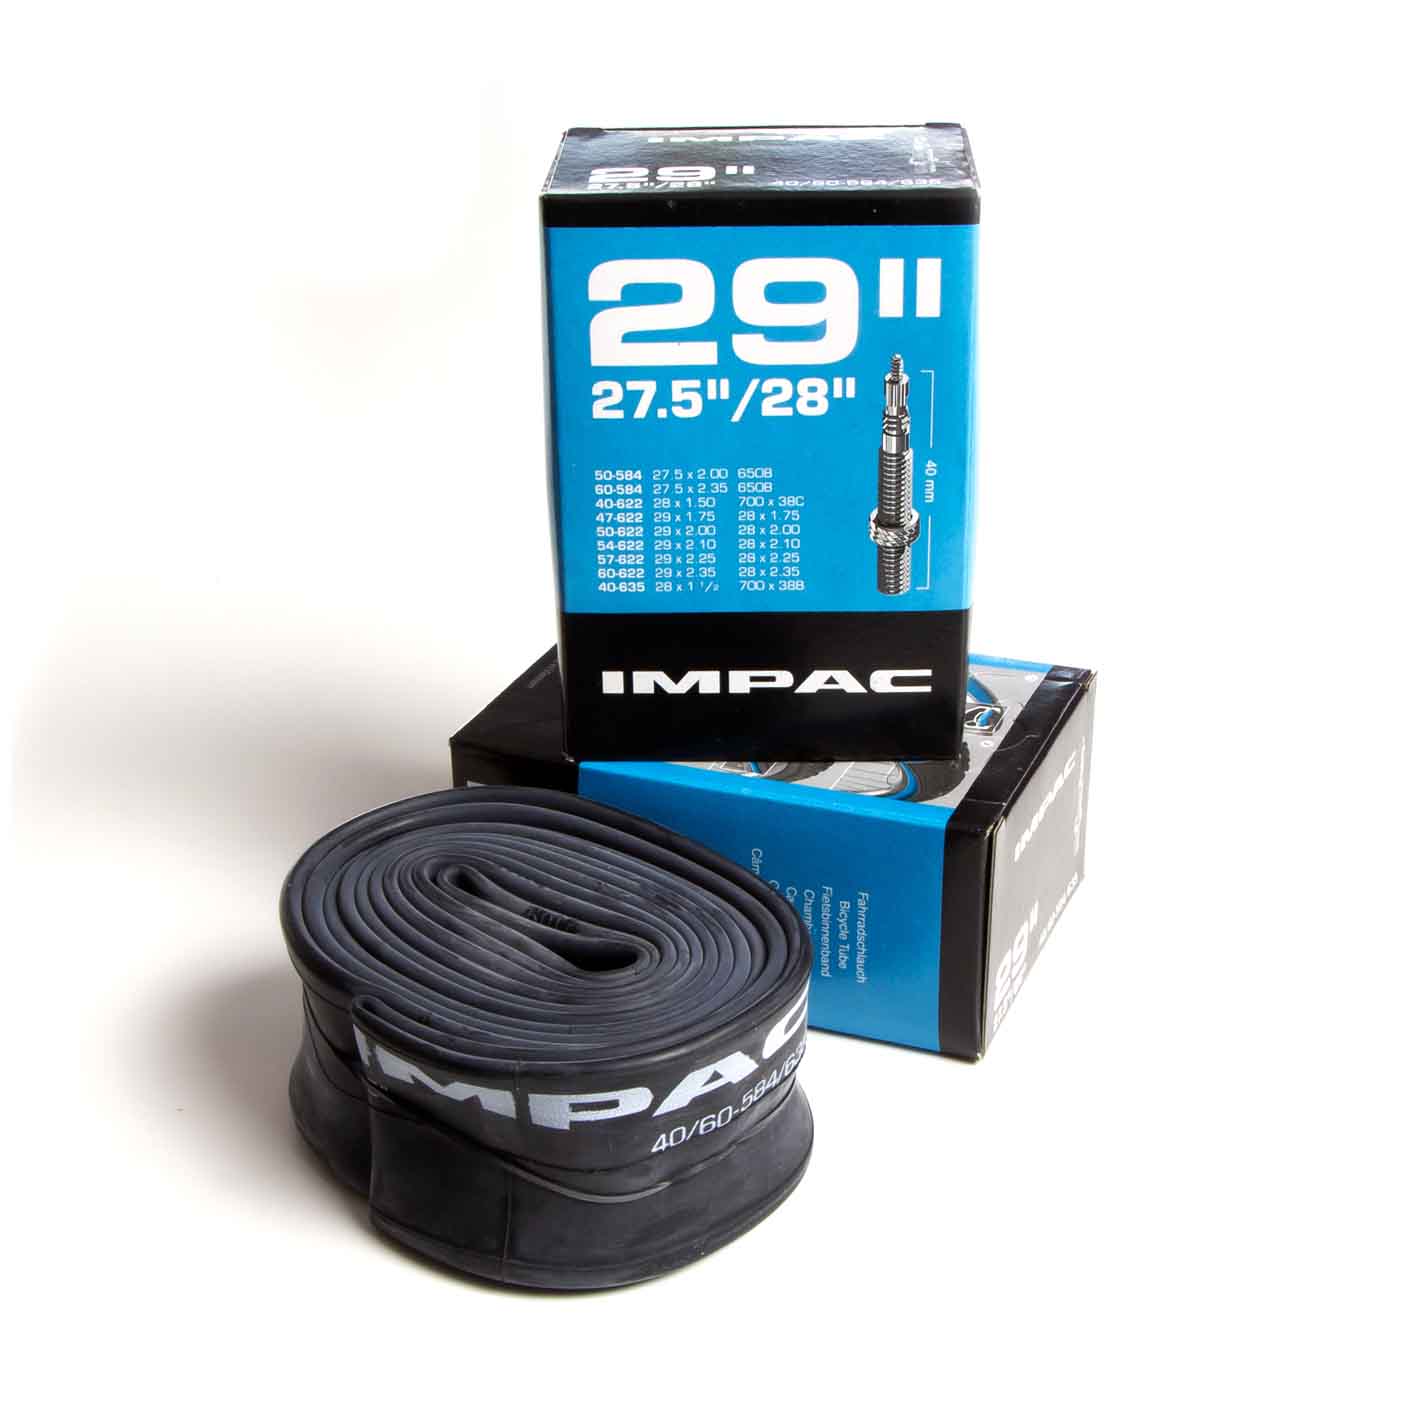 View 29 Inner Tubes 2 Pack information